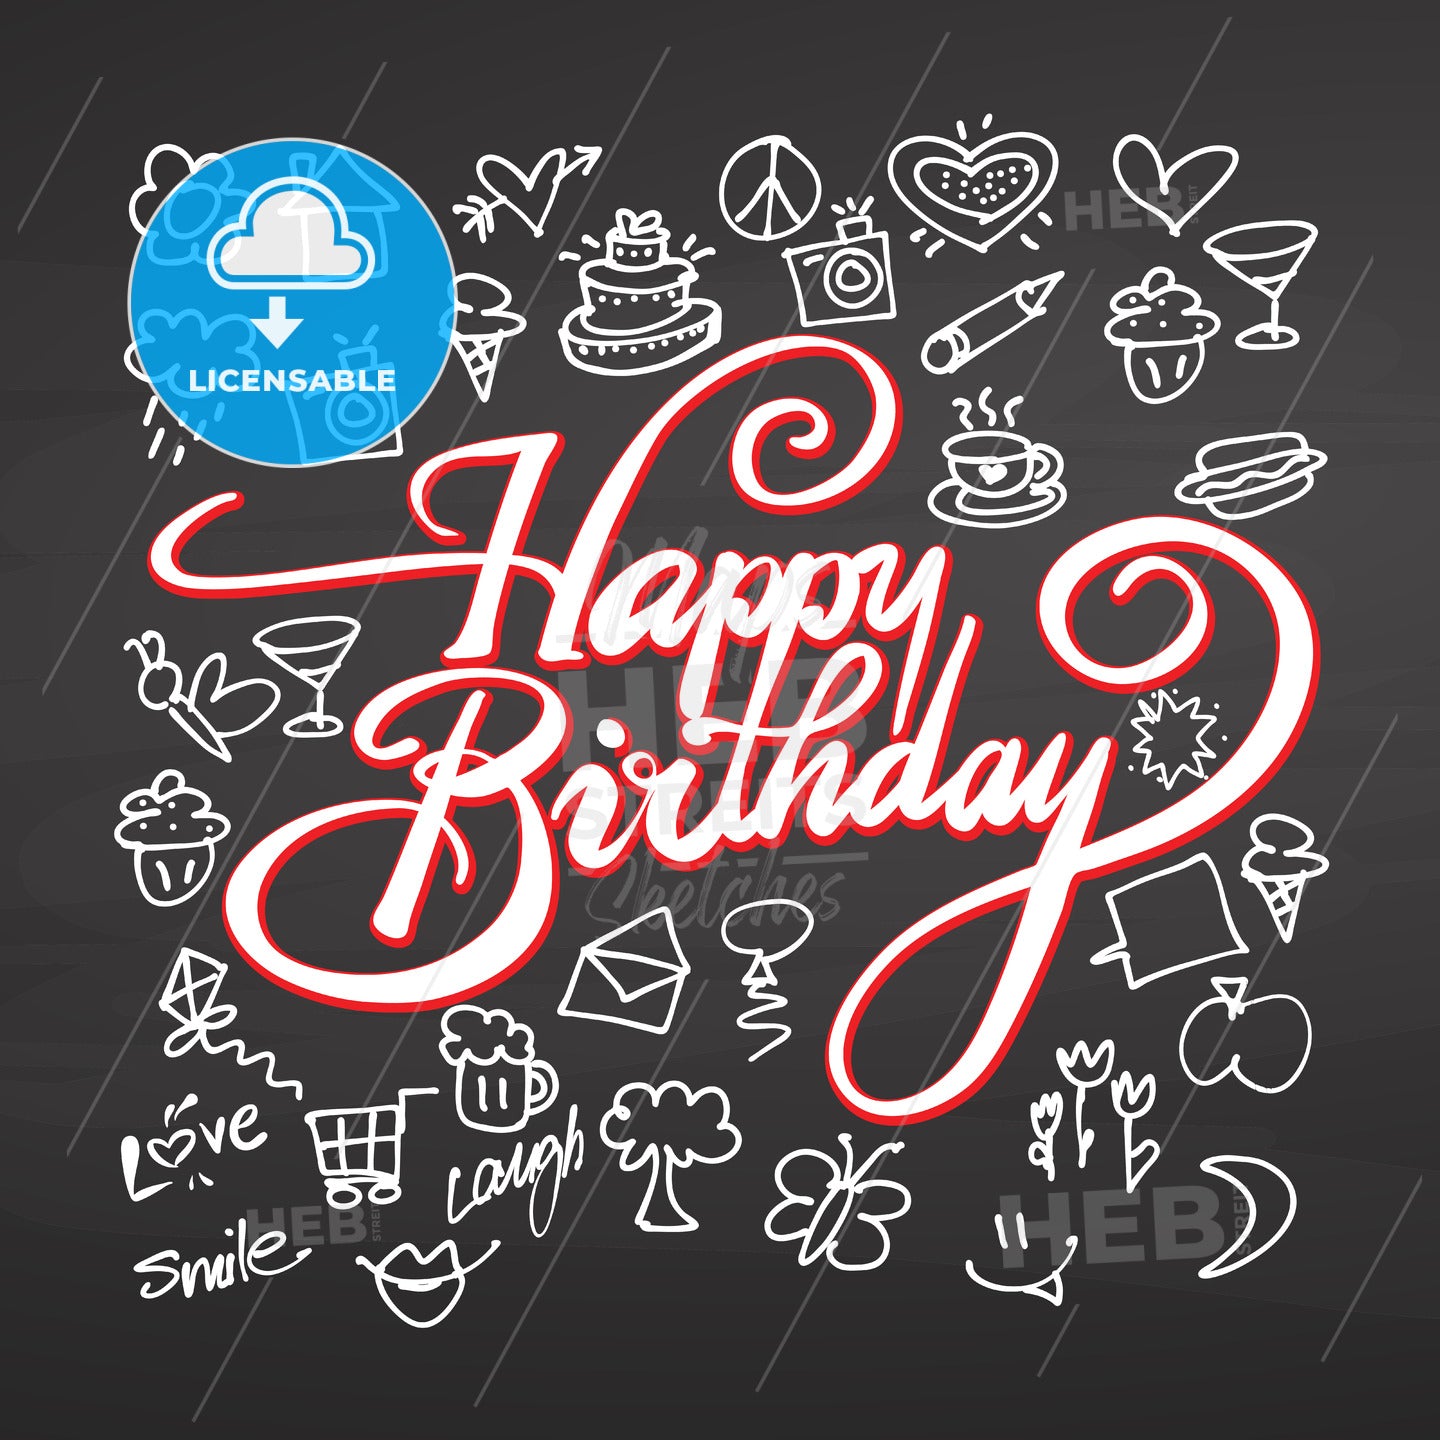 Happy birthday lettering and doodles on chalkboard – instant download